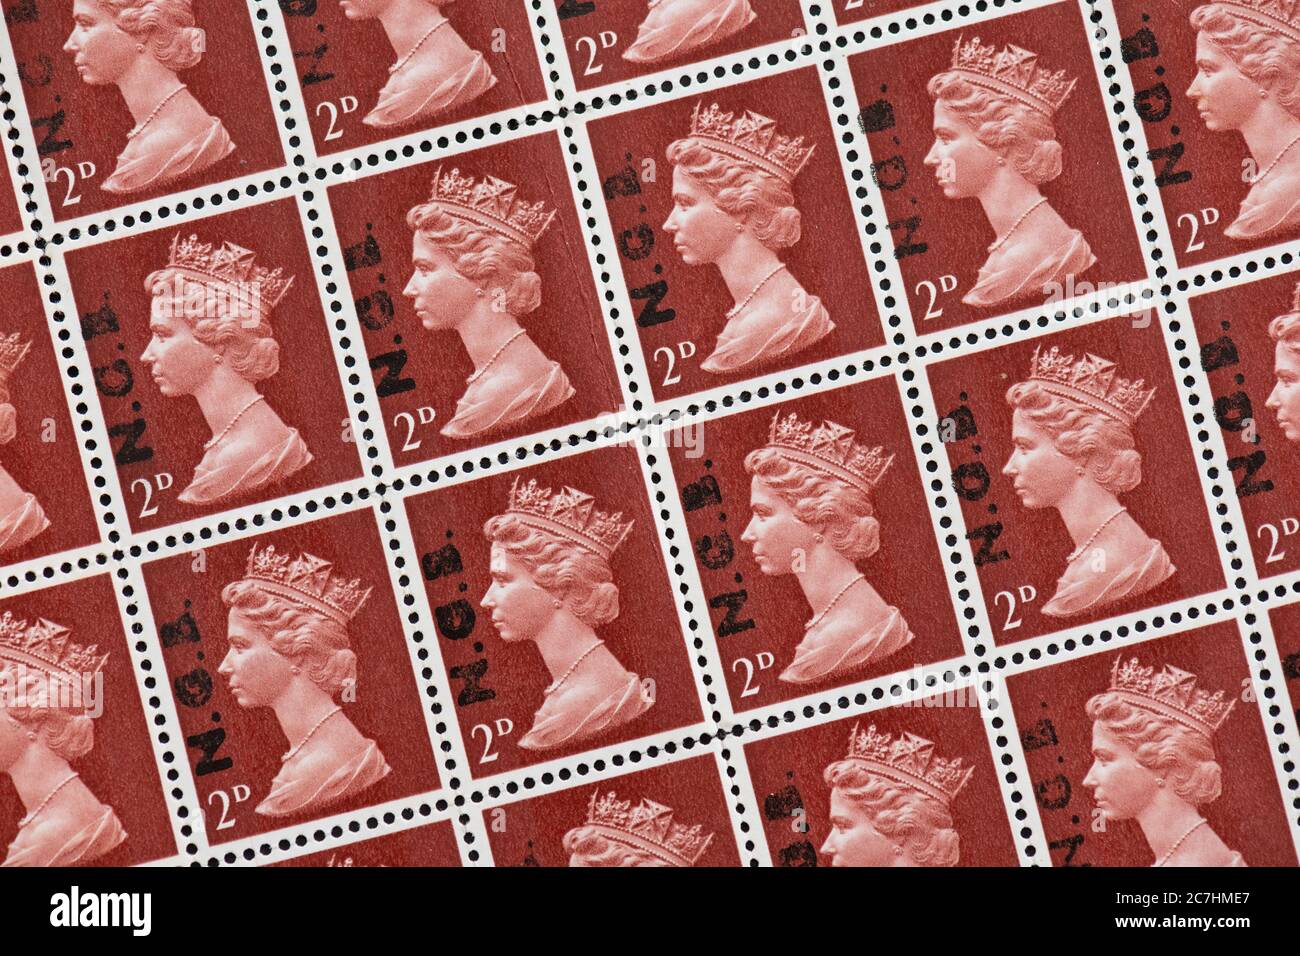 British 2d postage stamps overprinted with N.C.B (National Coal Board) Stock Photo